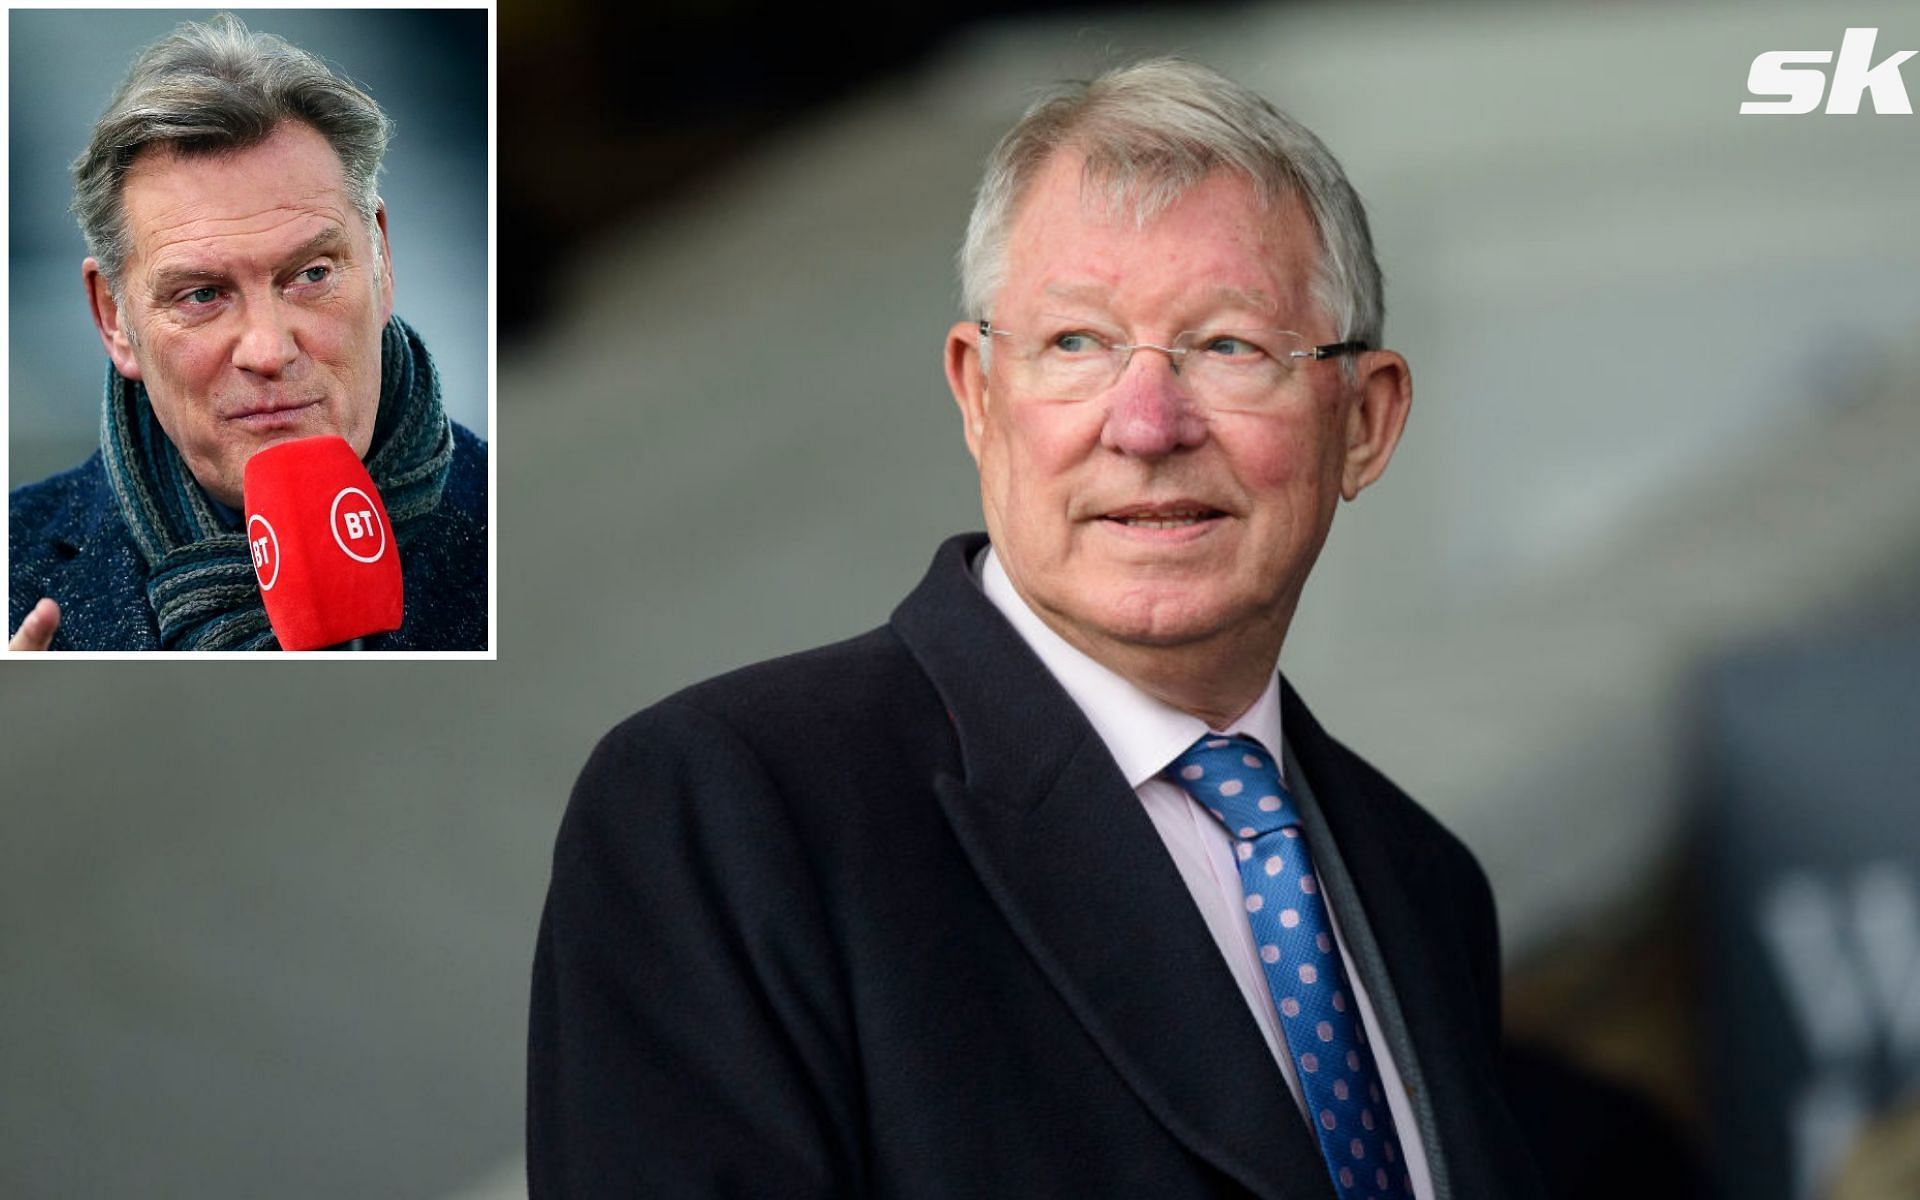 Former England manager Glen Hoddle revealed details of his row with Sir Alex Ferguson